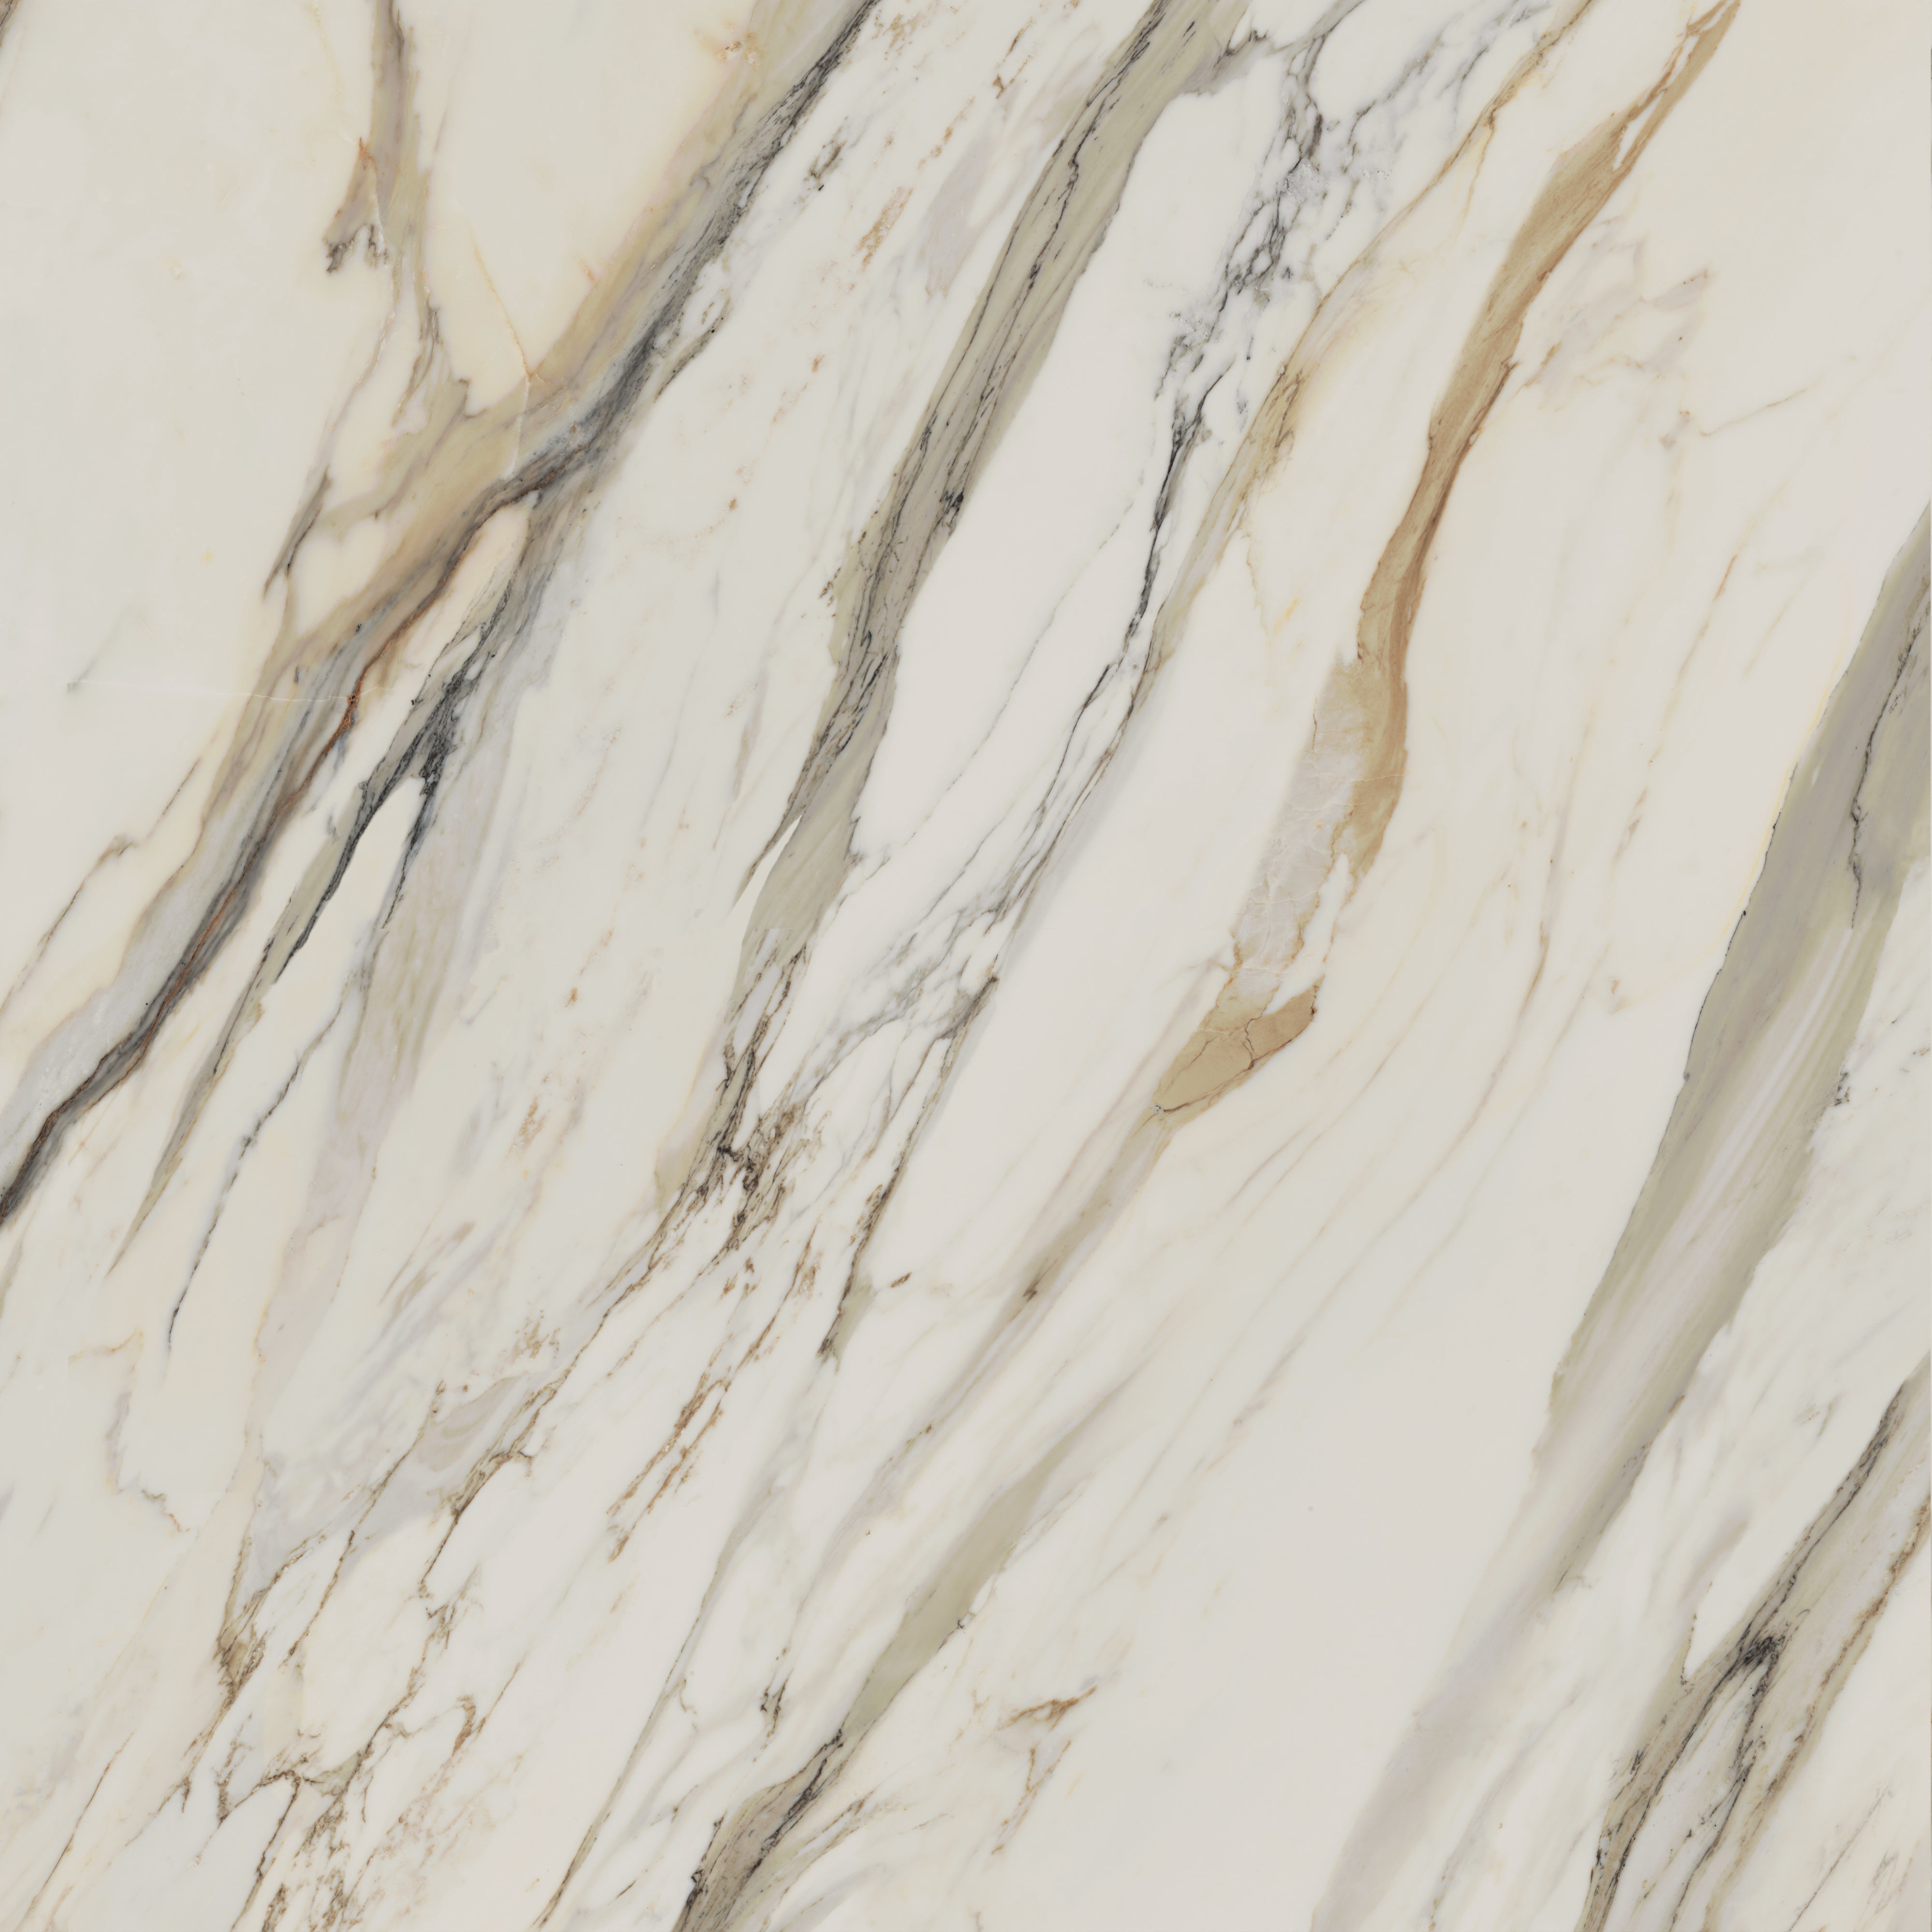 Aniston Calacatta Cremo Marble-Look Porcelain Tile featuring subtle cream veining for an elegant, timeless look.